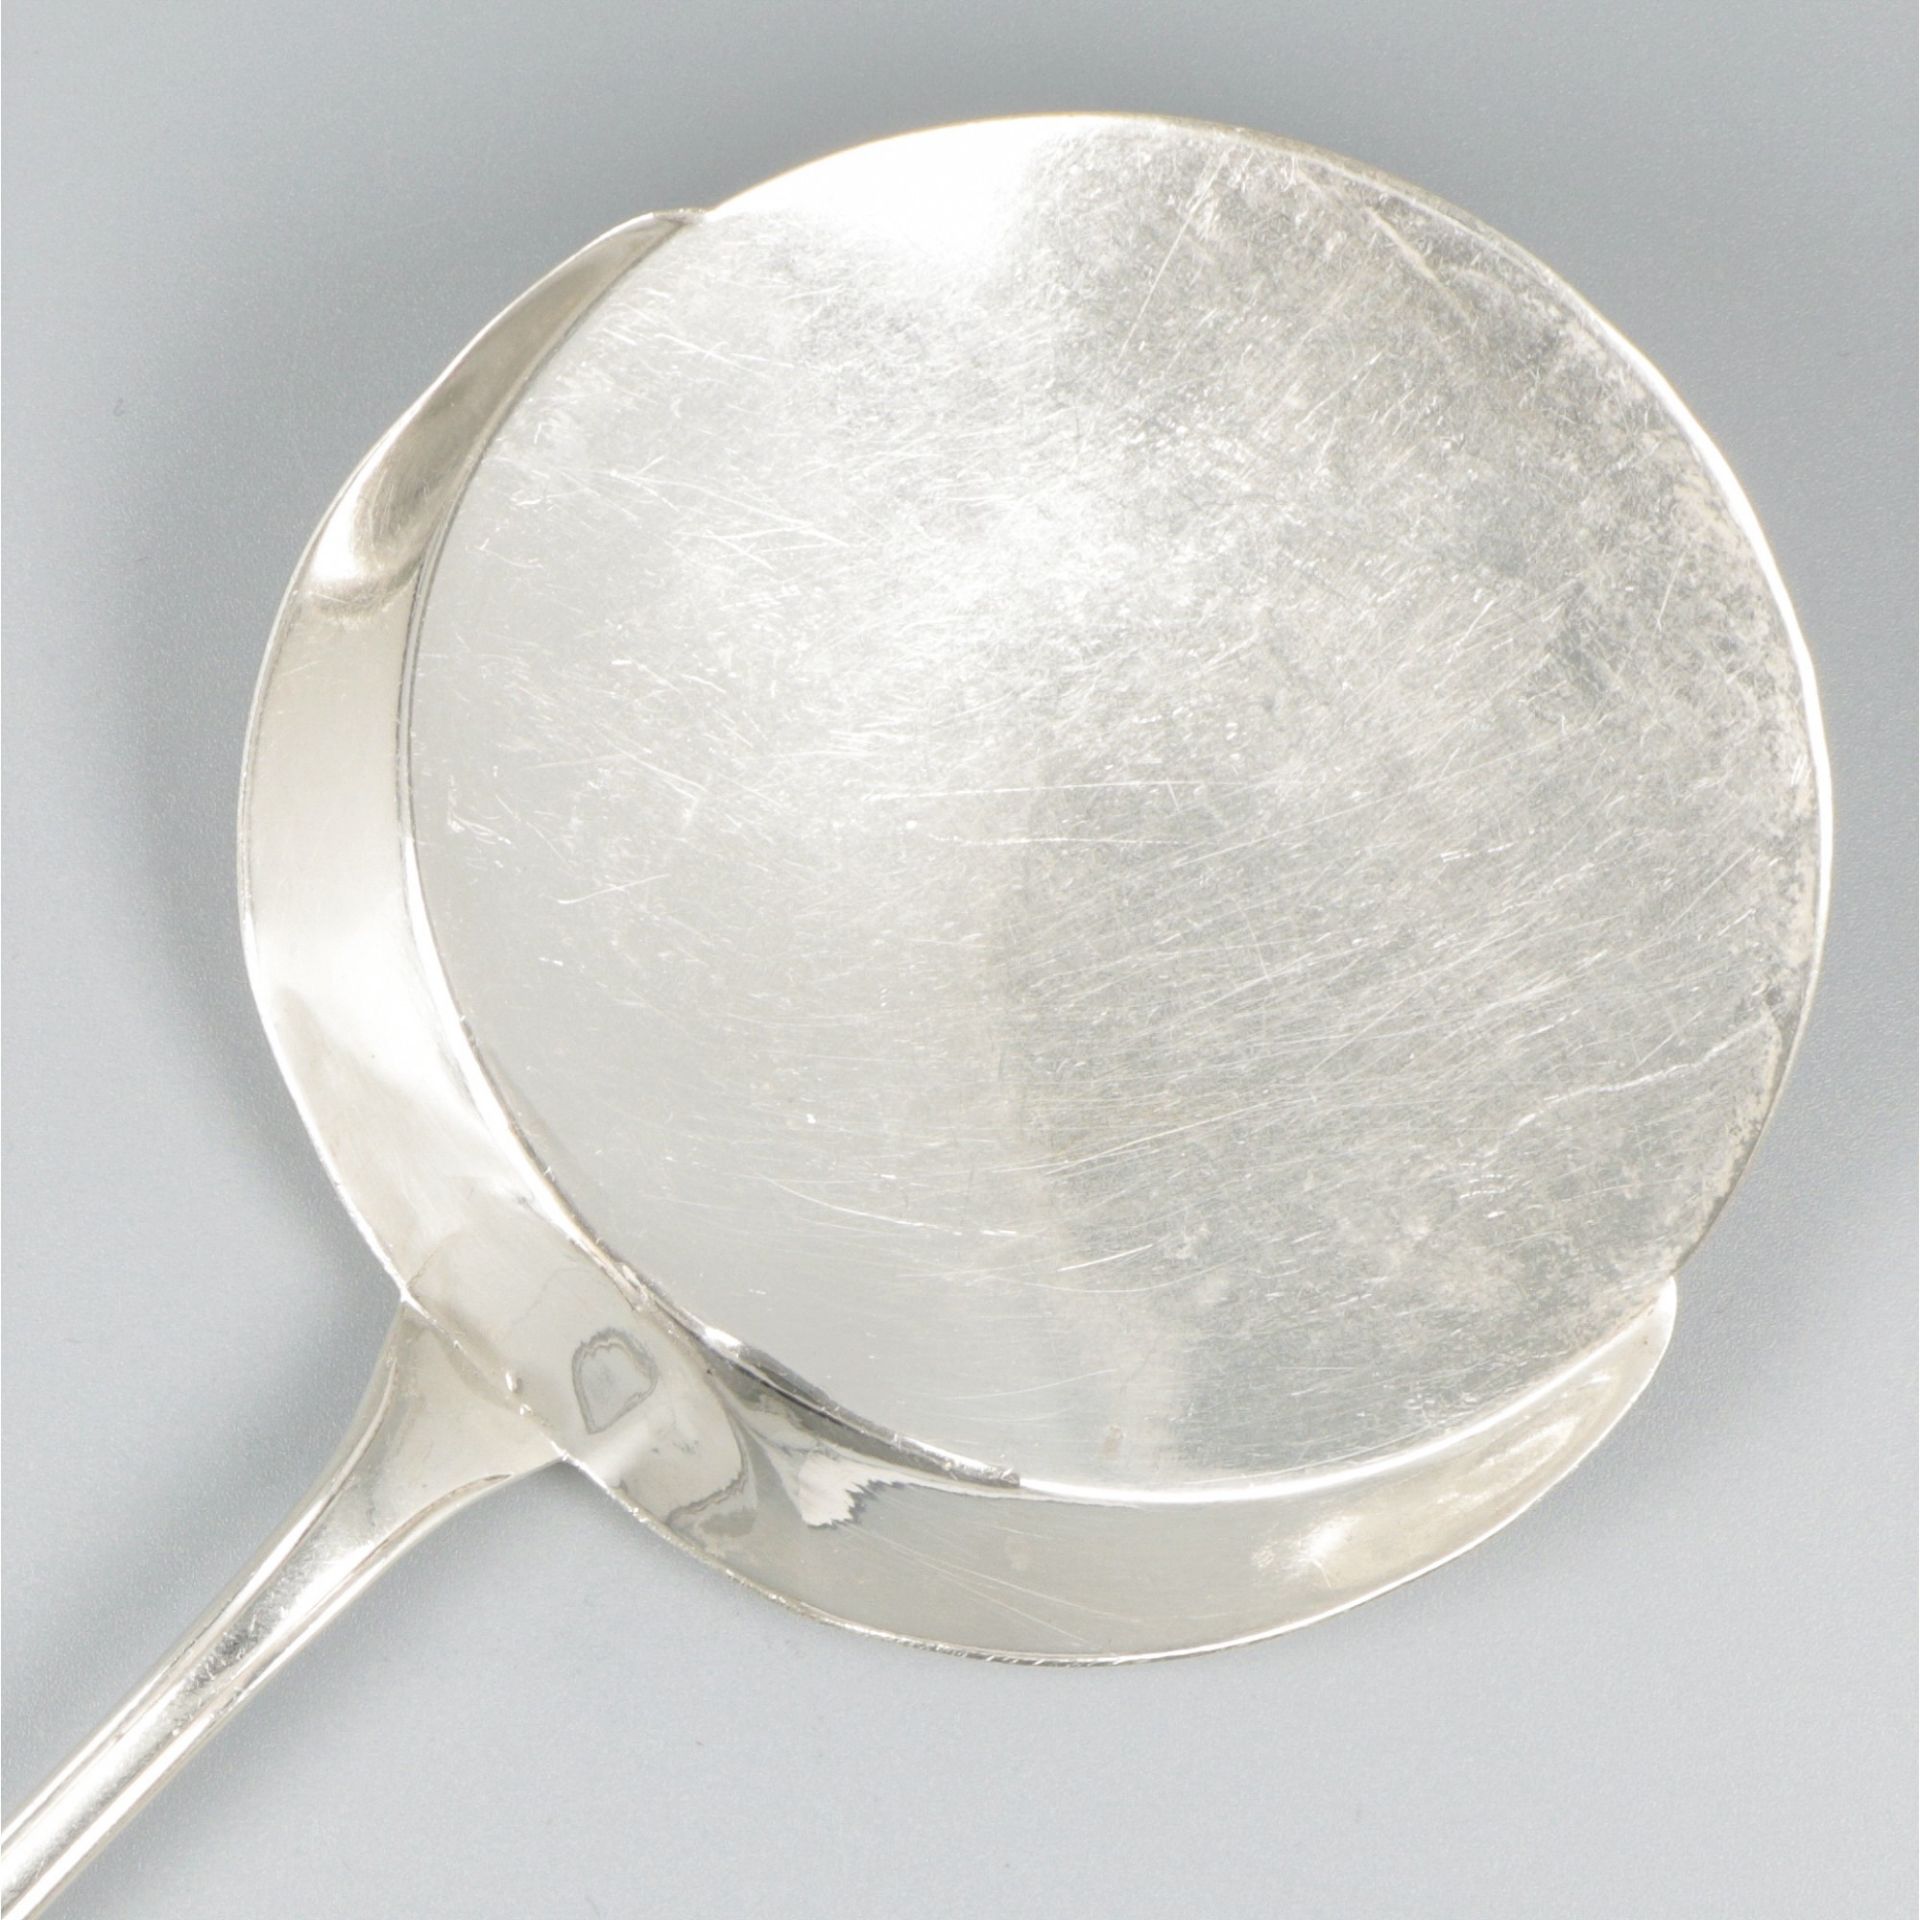 Fried egg scoop silver. - Image 3 of 6